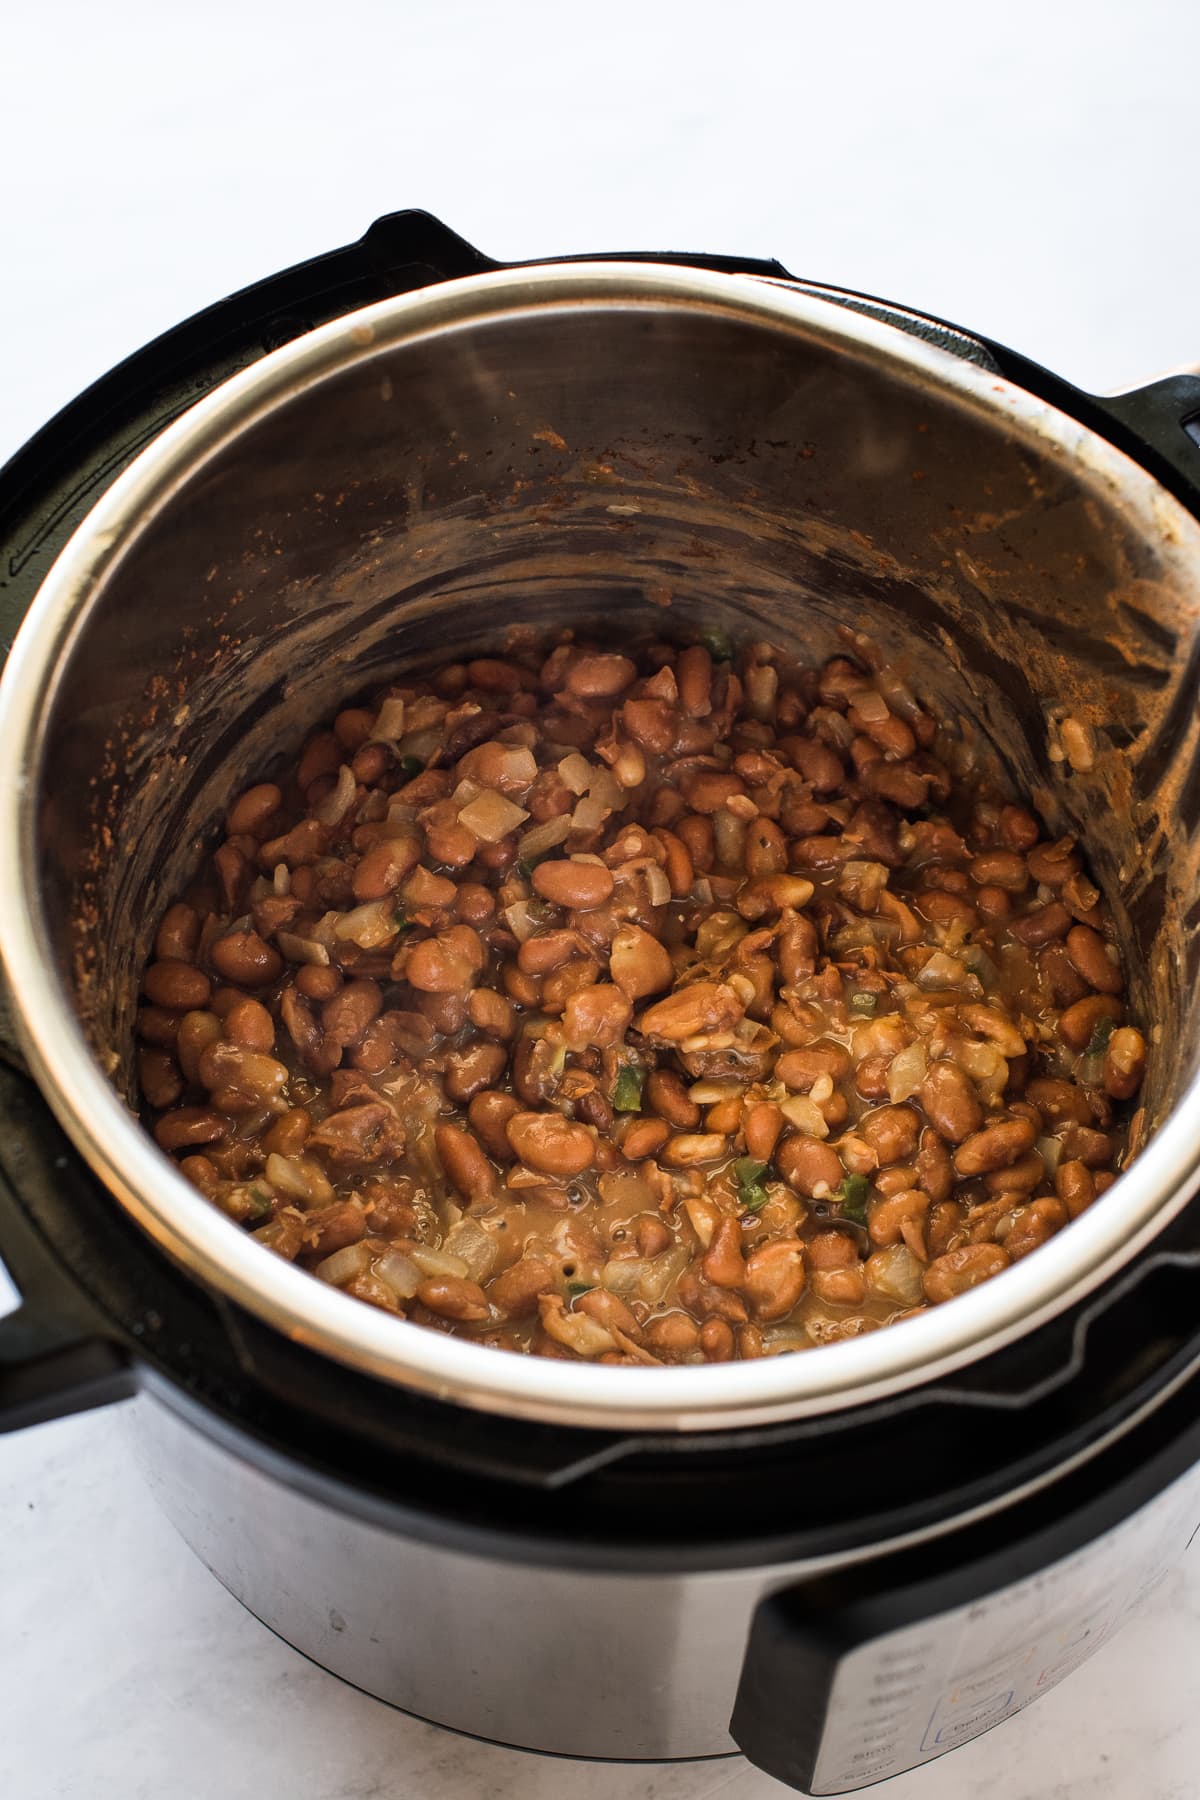 Pinto beans with onions, jalapeno, and garlic in the Instant Pot